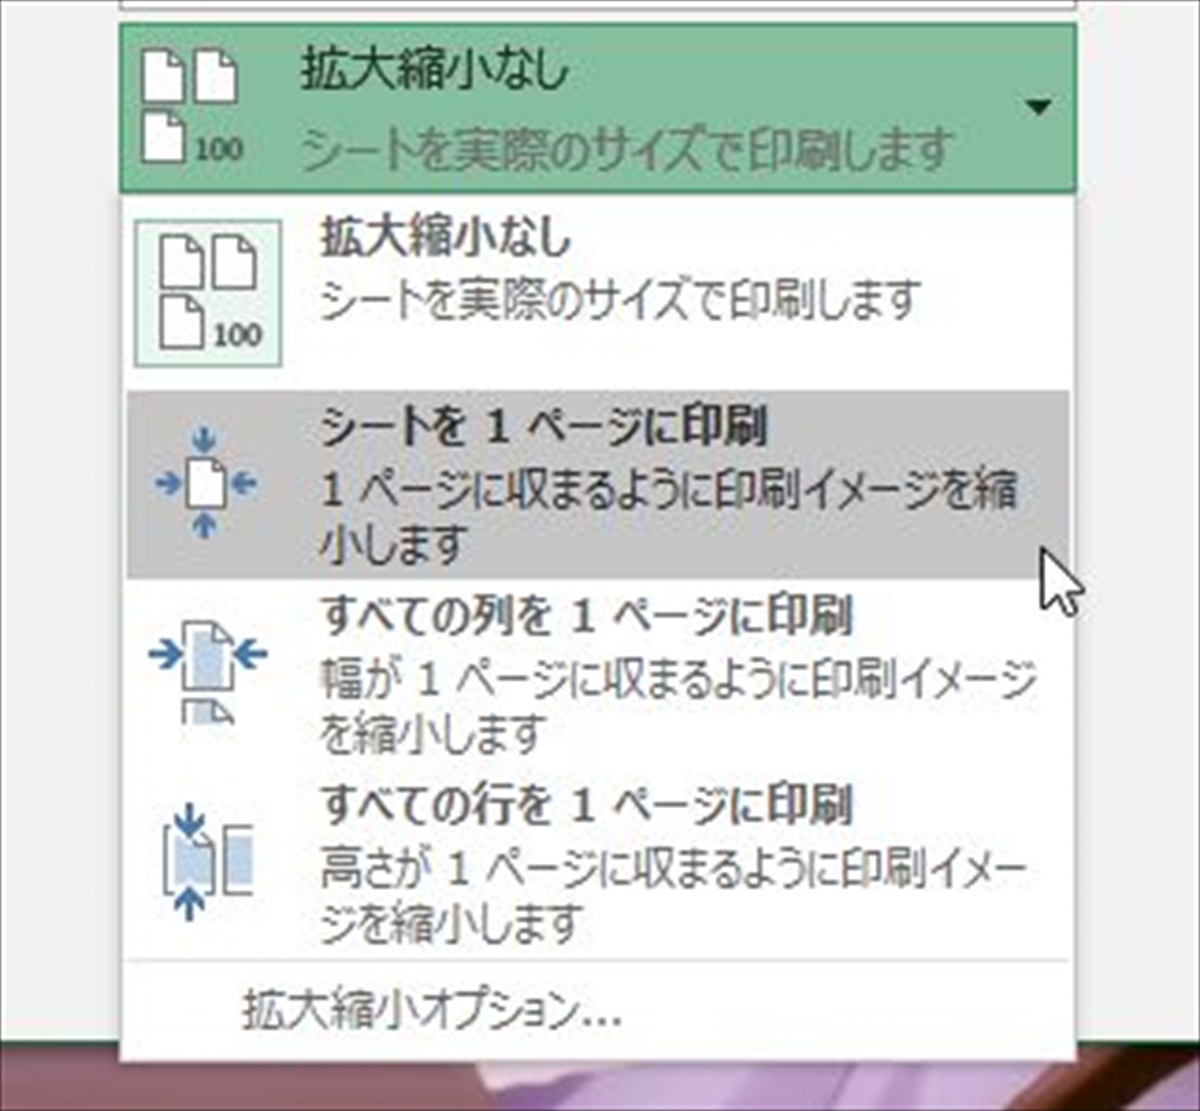 Excel Excelをメモ帳代わりに使用する 気ままにoffice